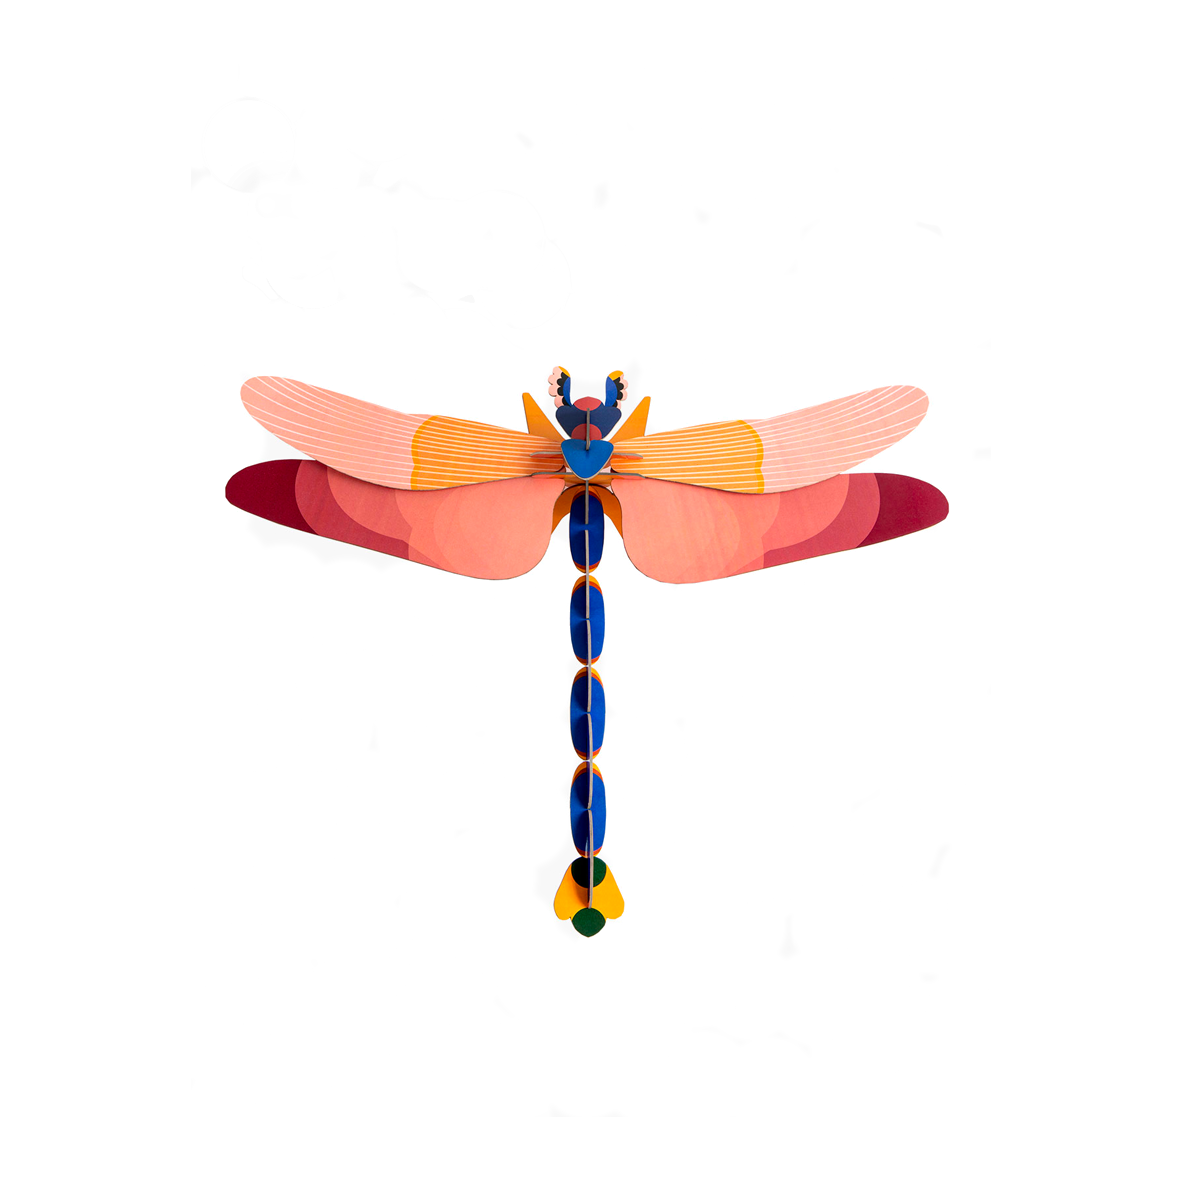 WALL ART | DELUXE PINK DRAGONFLY